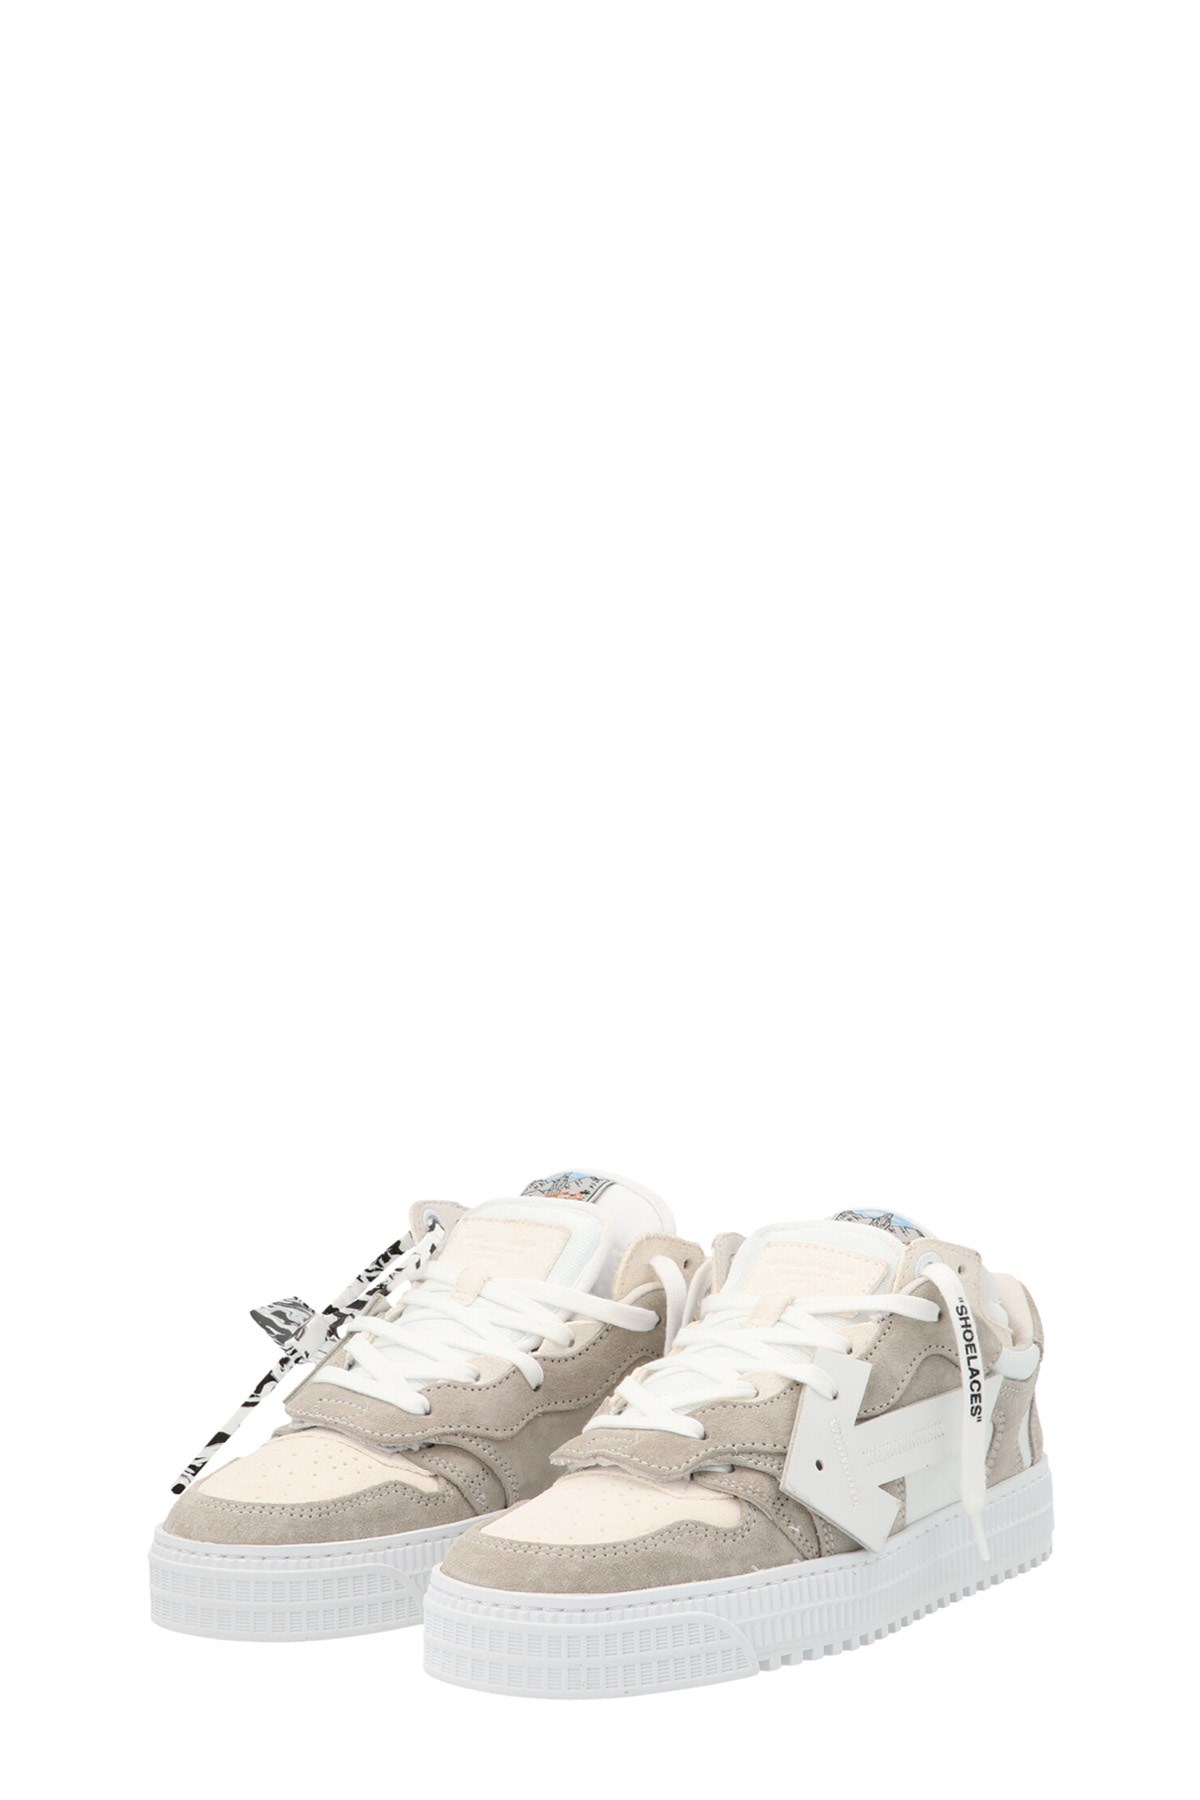 OFF-WHITE 'Floating Arrow’ Sneakers